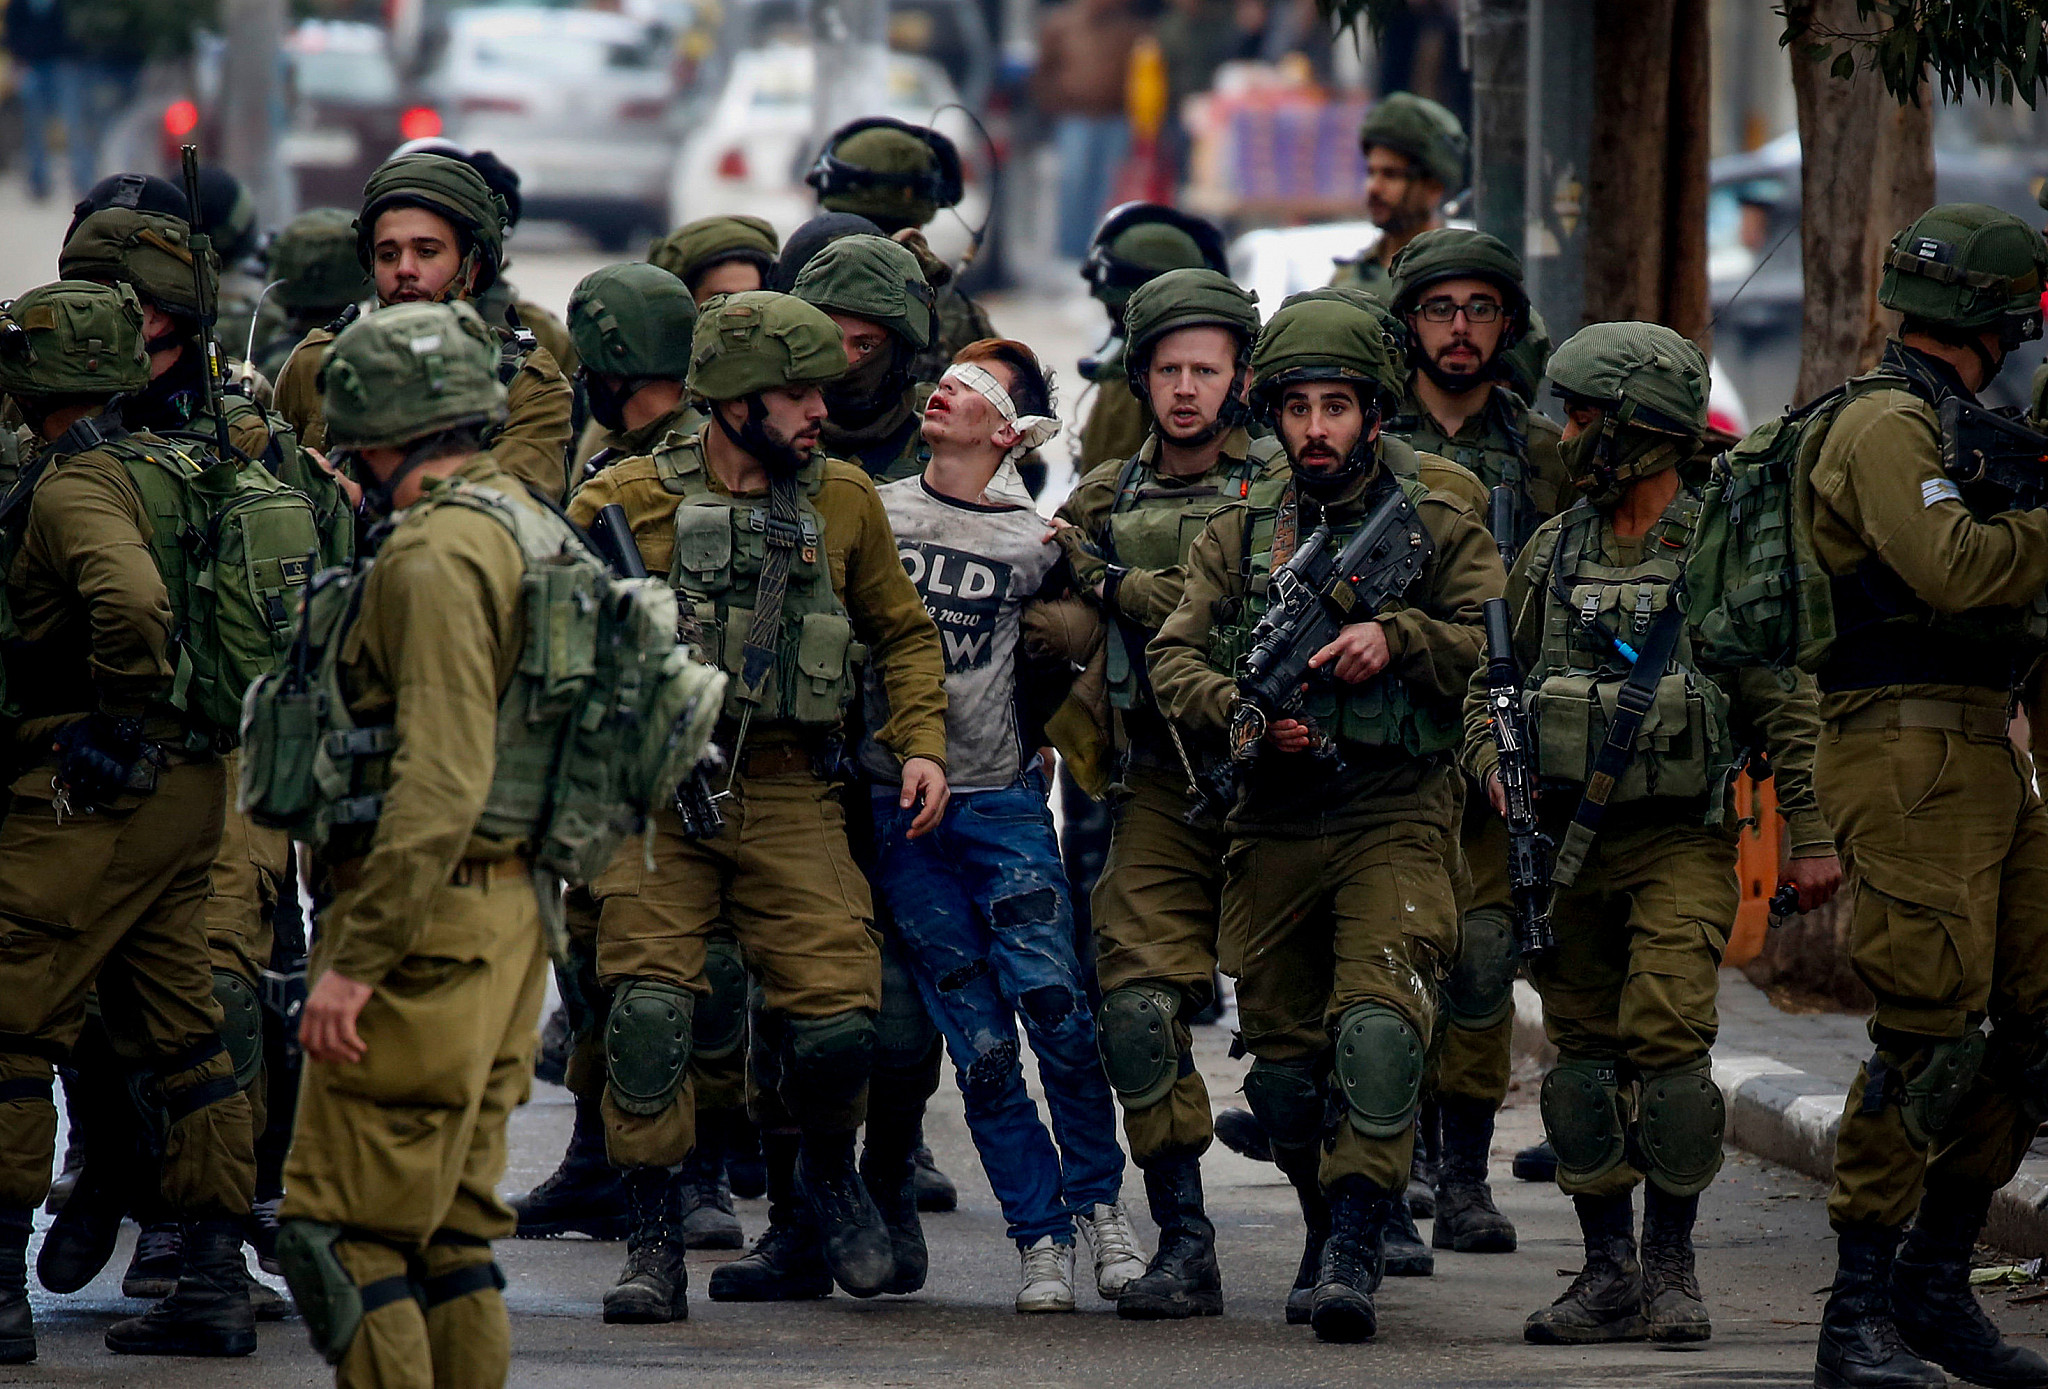 Israeli soldiers arrest a Palestinian youth during a protest against Donald Trump's recognition of Jerusalem as Israel's capital, Hebron, West Bank, December 7, 2017. (Wisam Hashlamoun/Flash90)